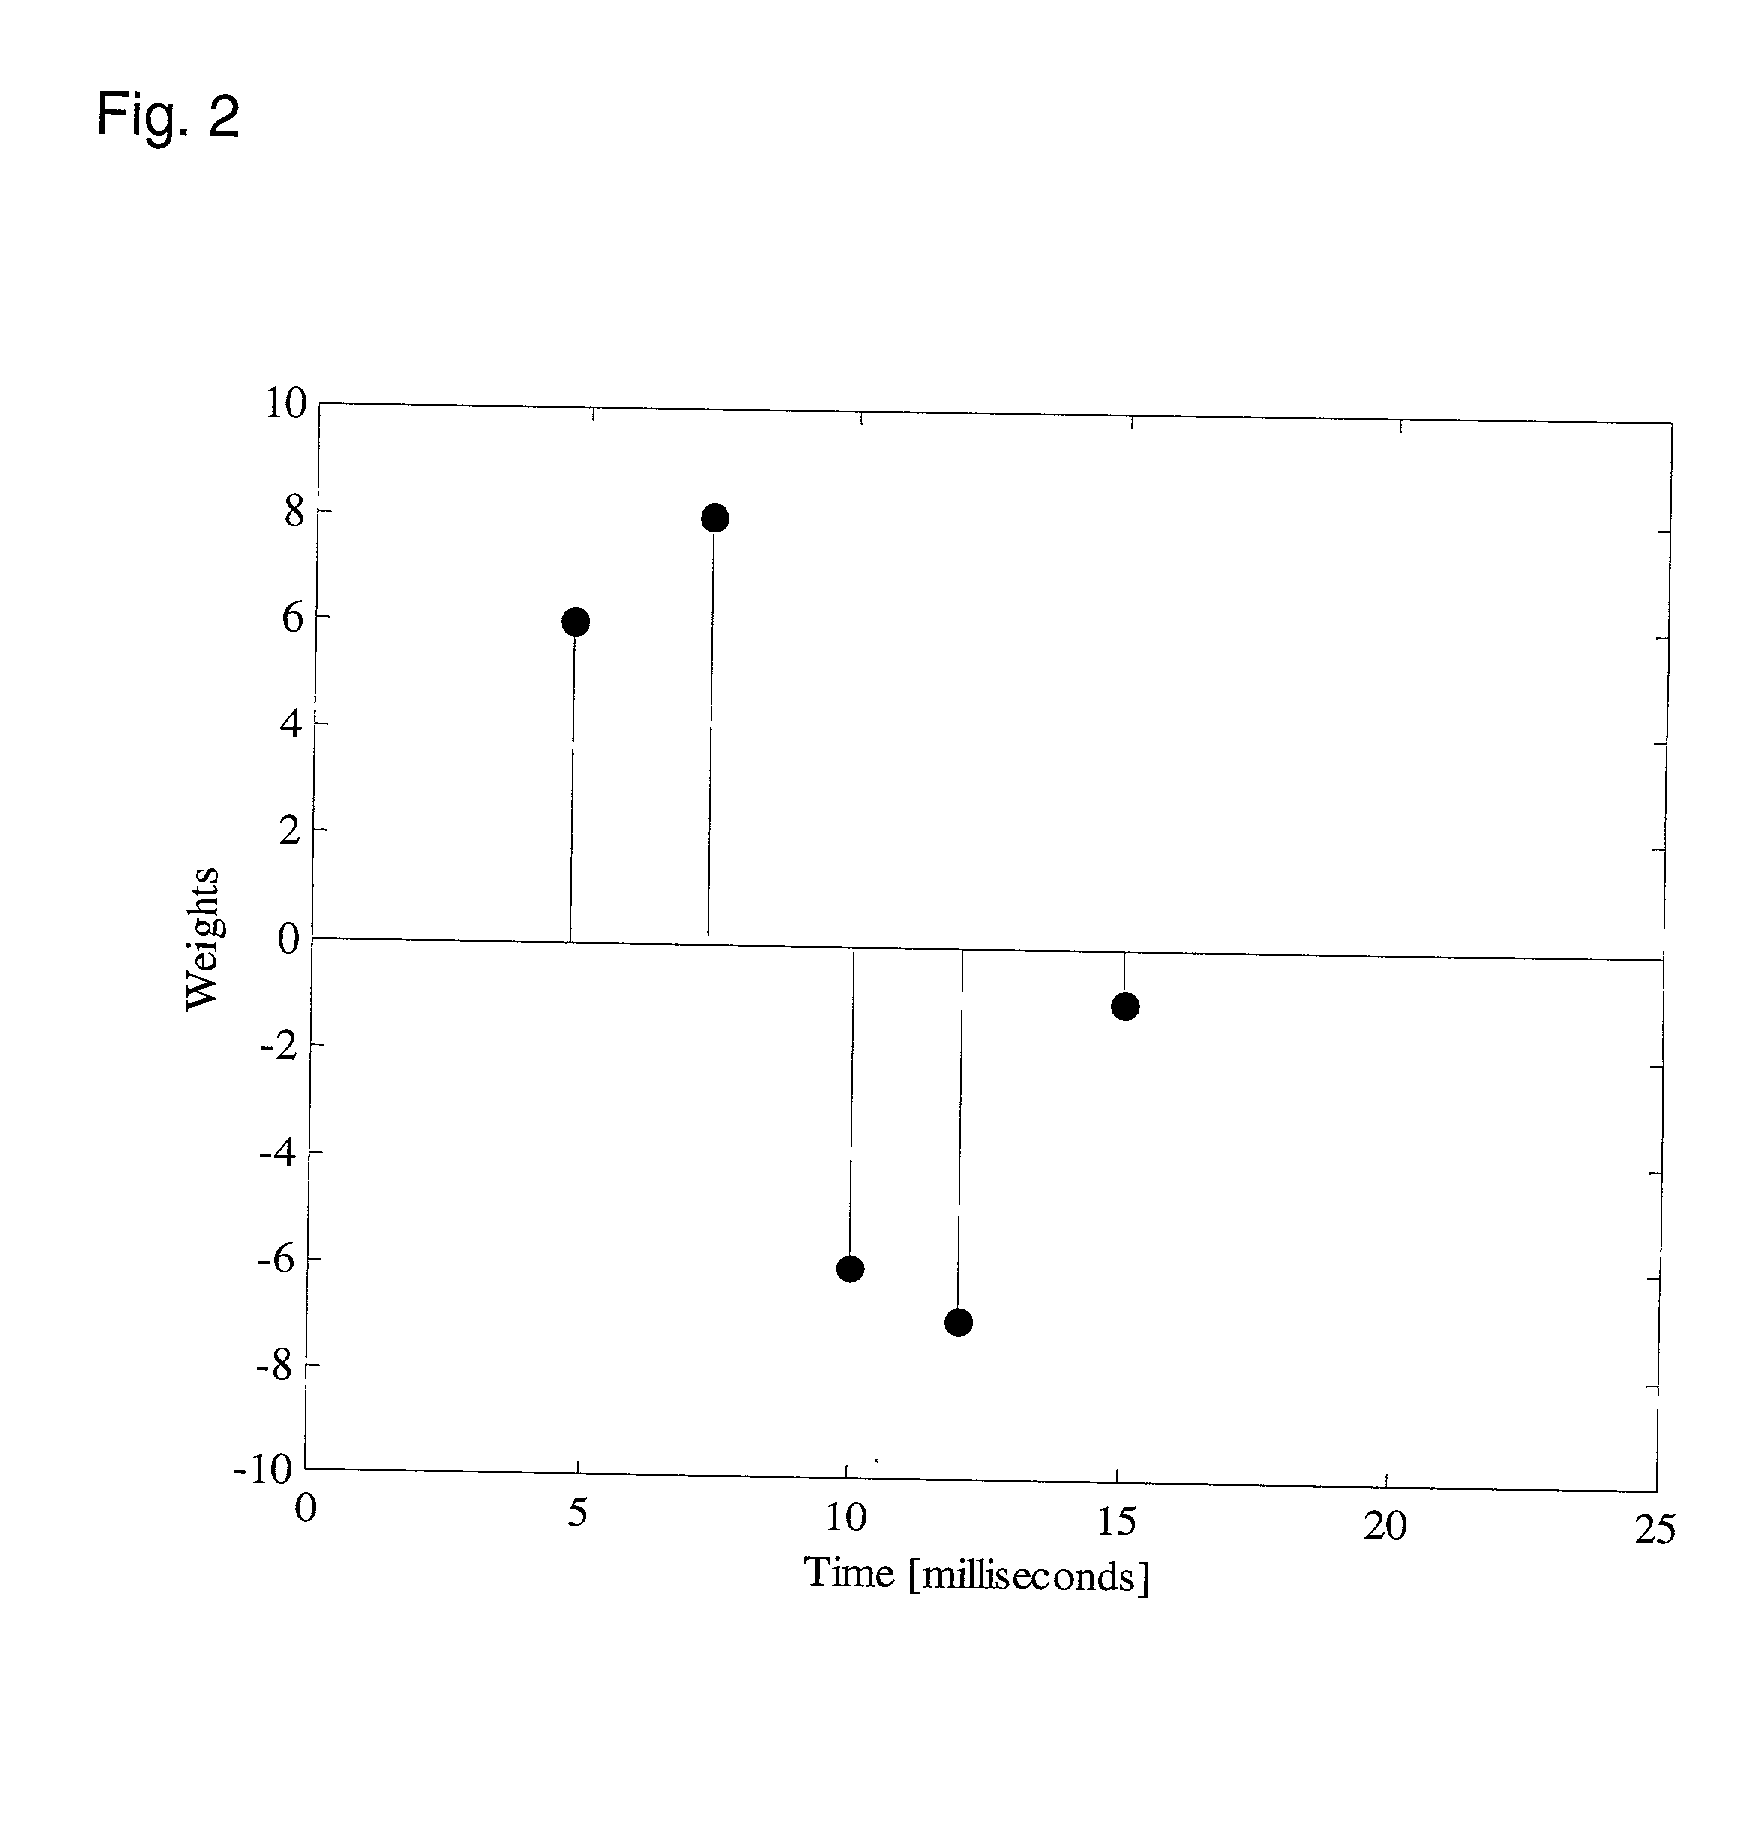 Hearing evaluation device with noise-weighting capabilities